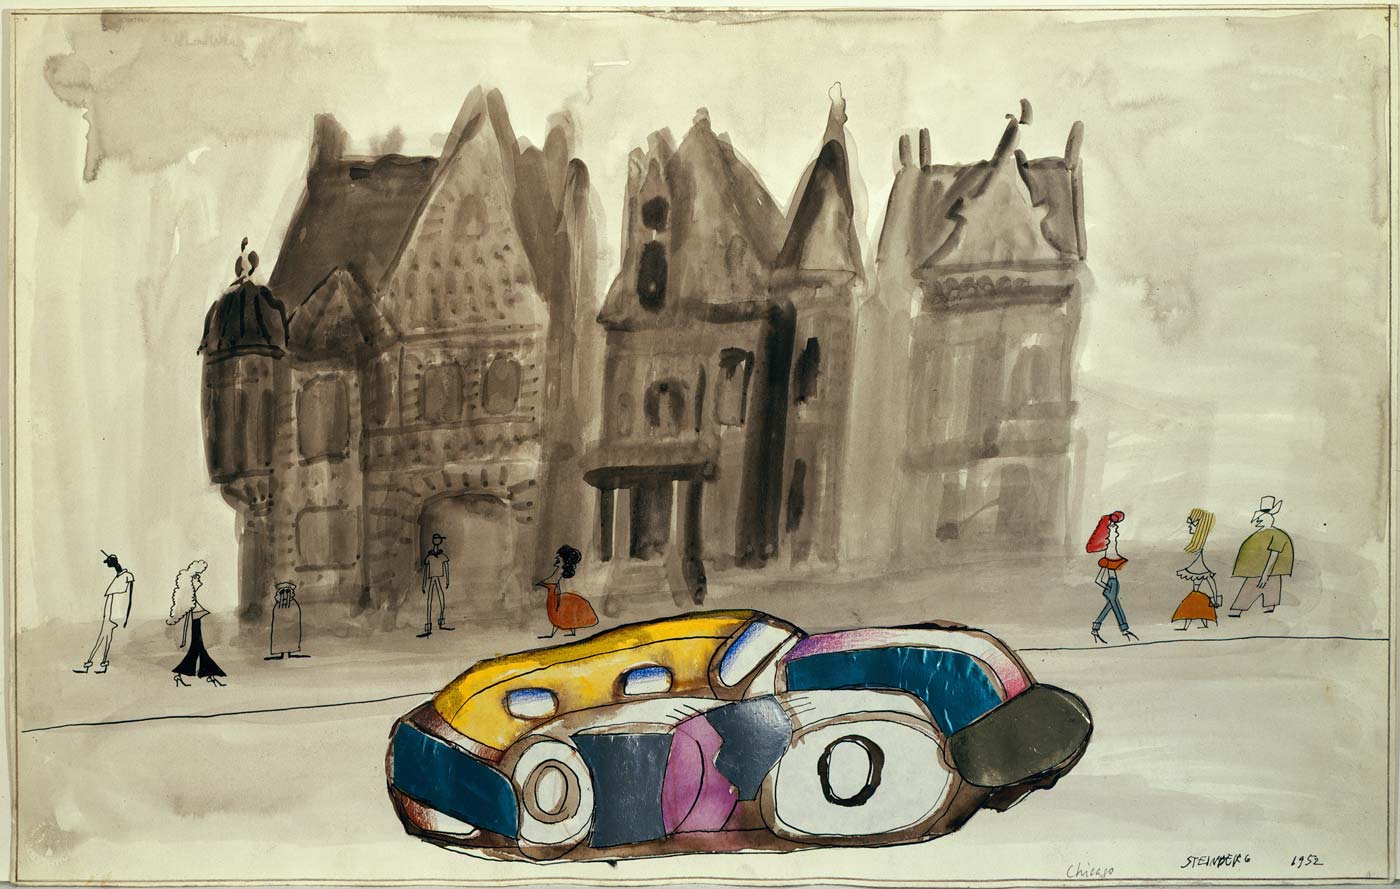 Chicago, 1952. Ink, crayon, watercolor, and foil collage on paper, 14 ½ x 23 in. The Saul Steinberg Foundation.